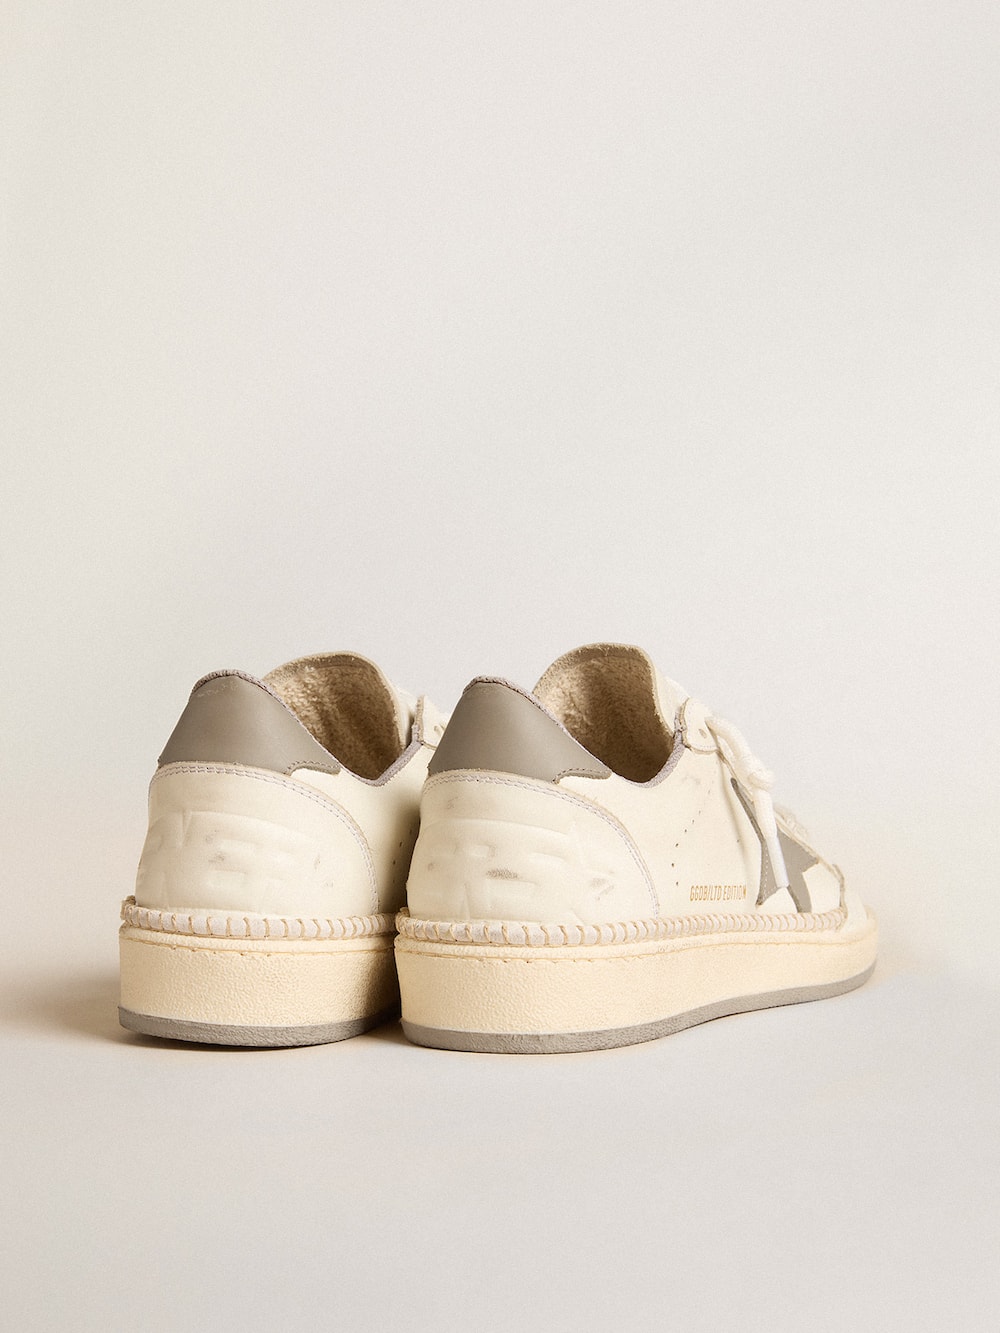 Golden Goose - Women's Ball Star LTD with khaki leather star and heel tab and stitching in 